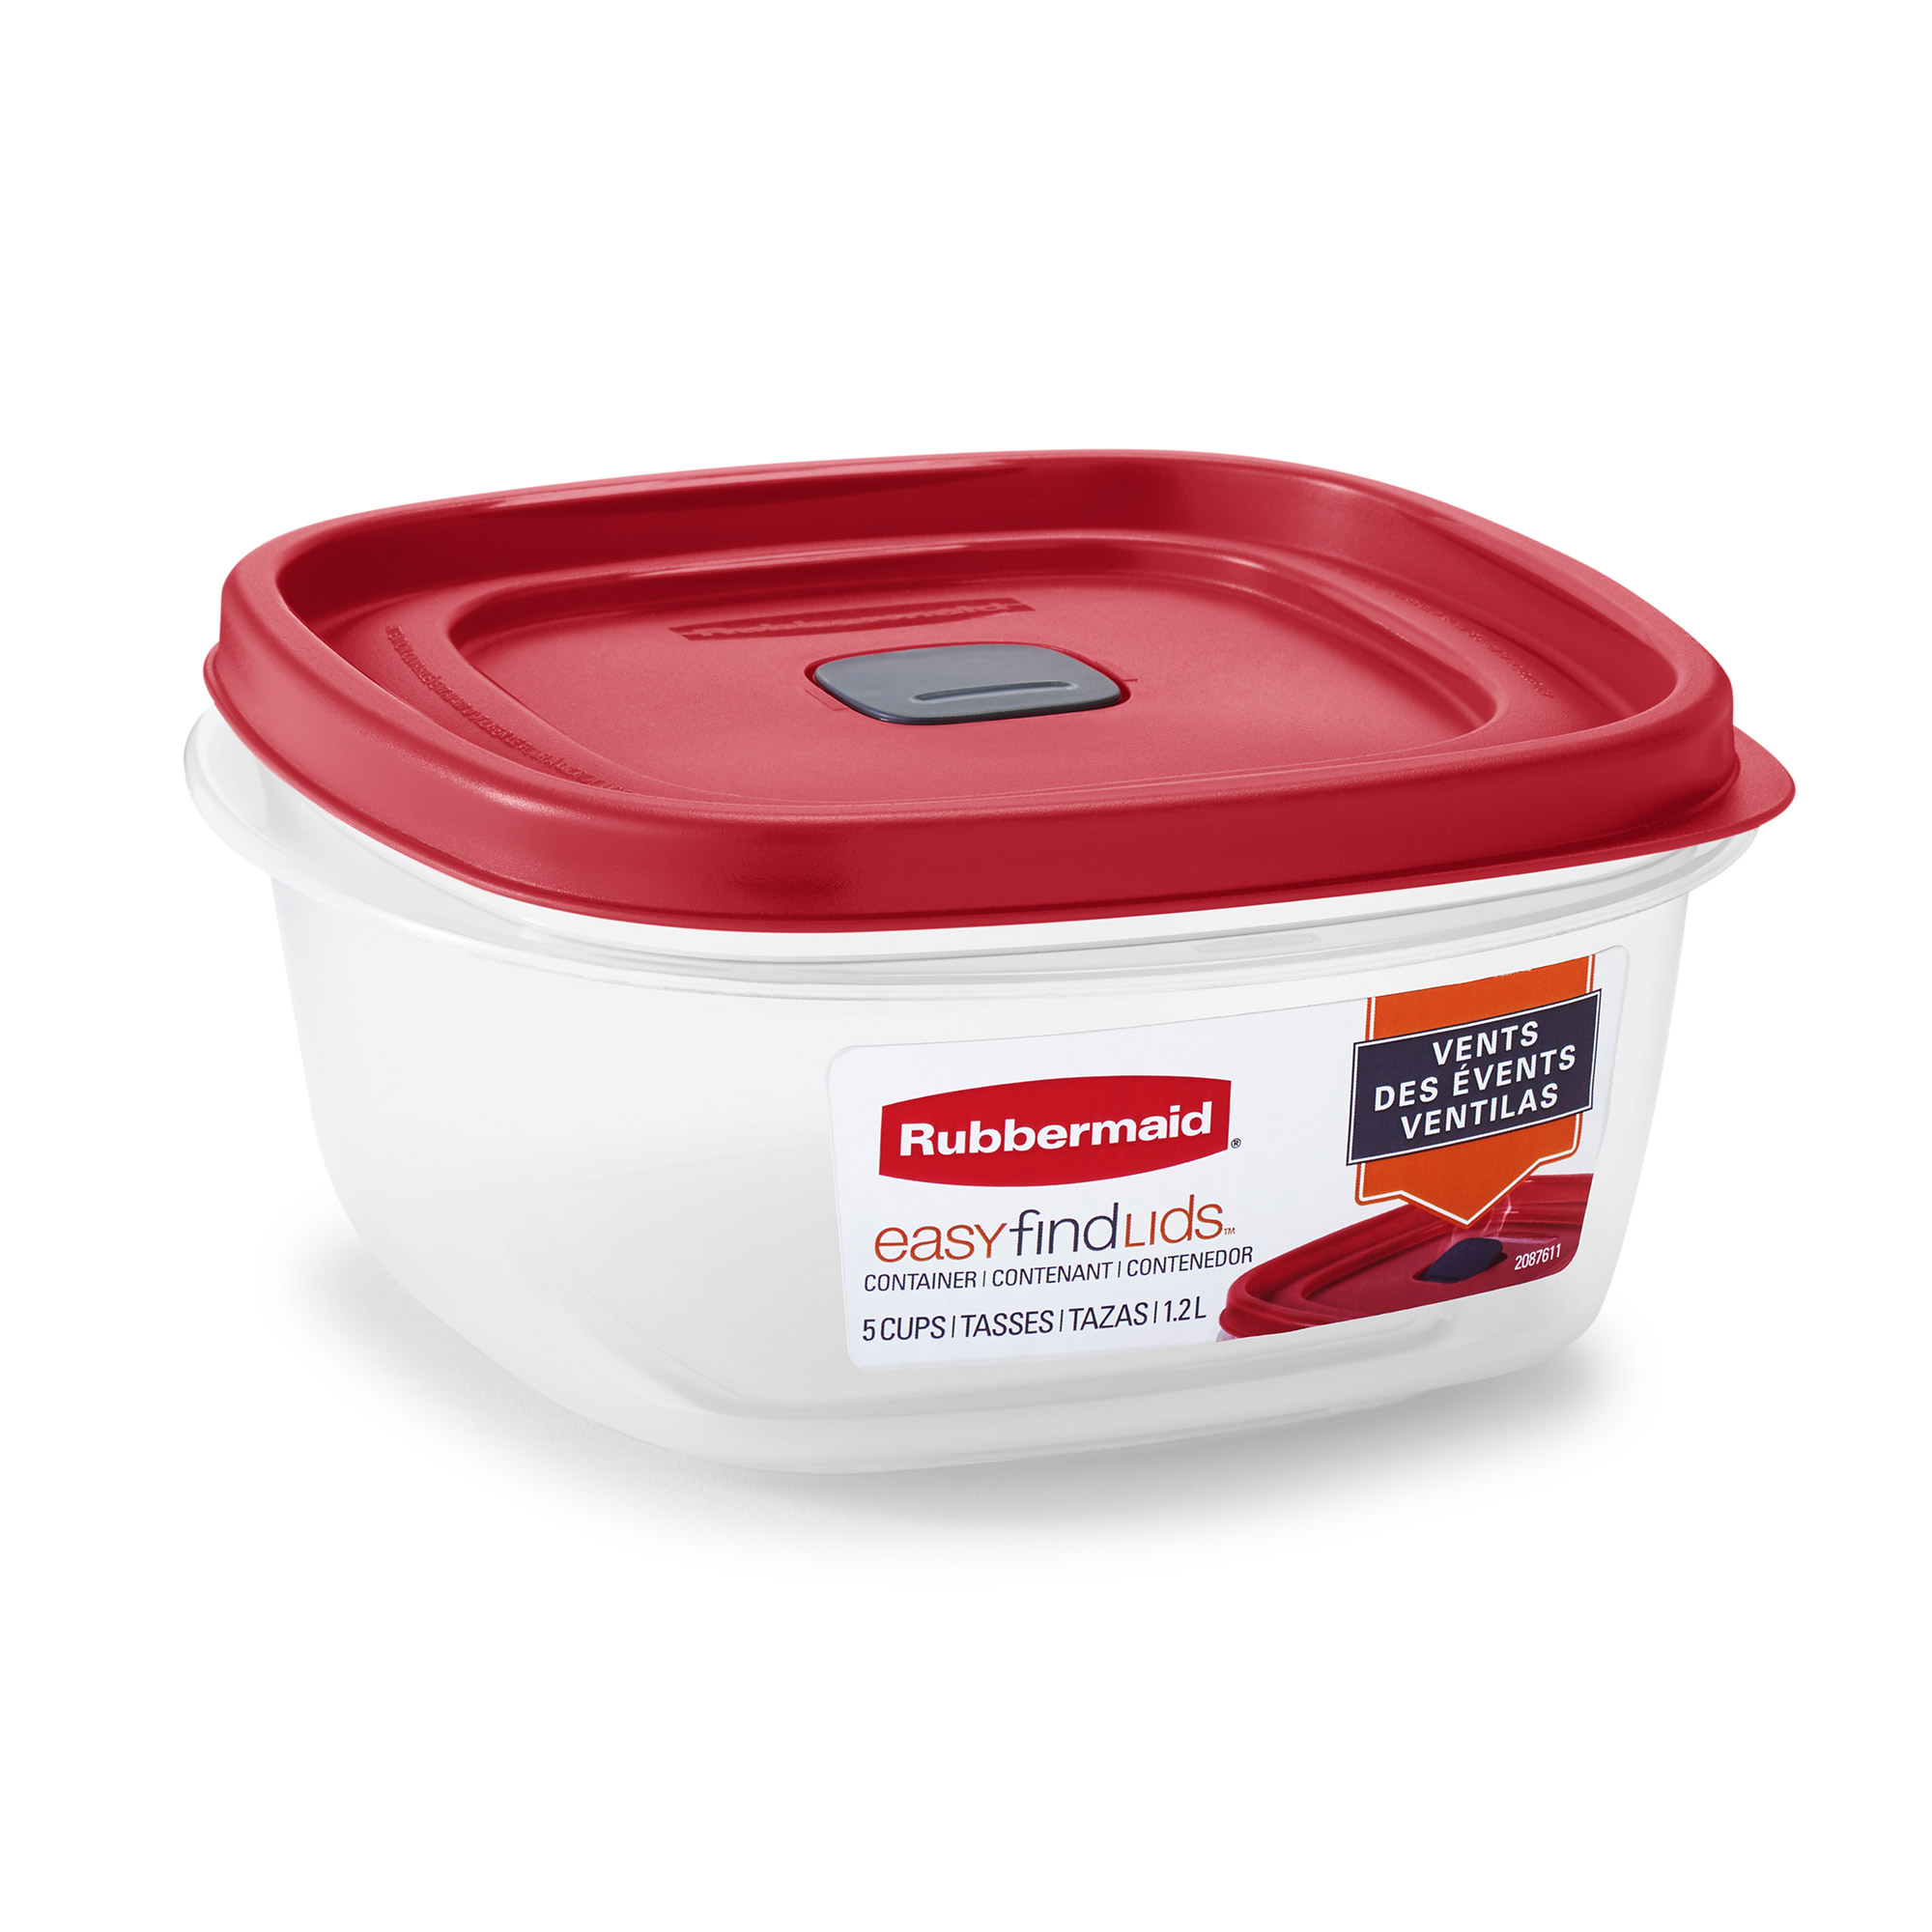 Rubbermaid, Easy Find Lid Food Storage Containers with Vented Lids, 40-Piece Set - image 5 of 8